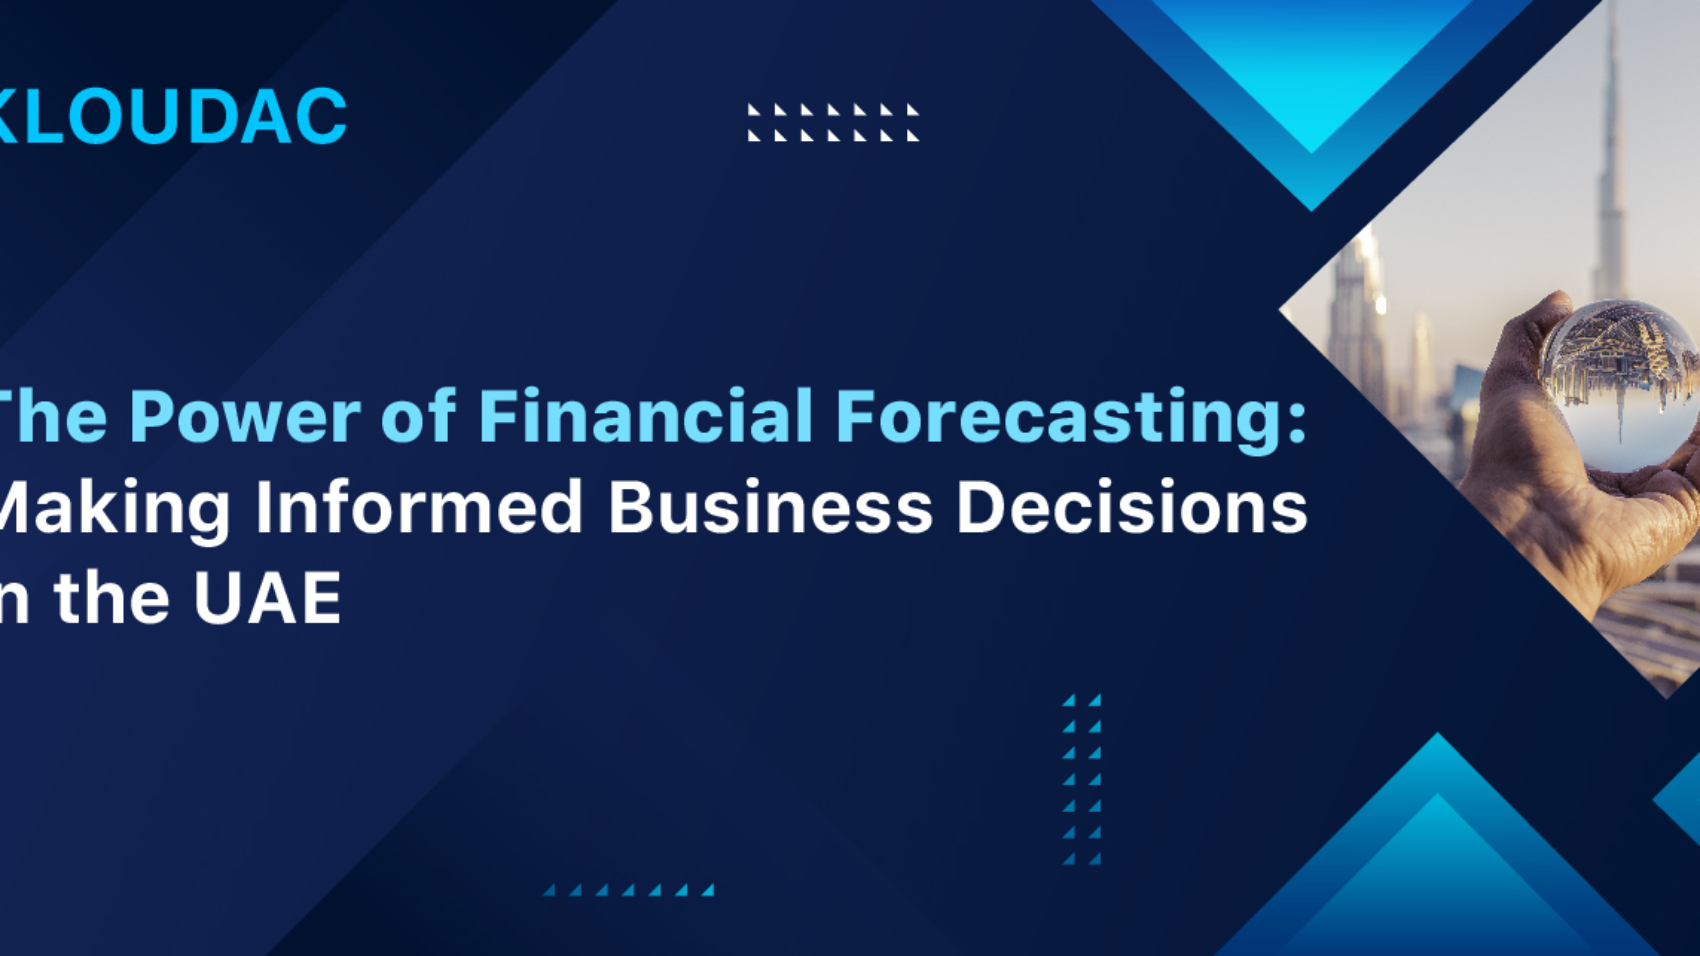 The Power of Financial Forecasting: Making Informed Business Decisions in the UAE